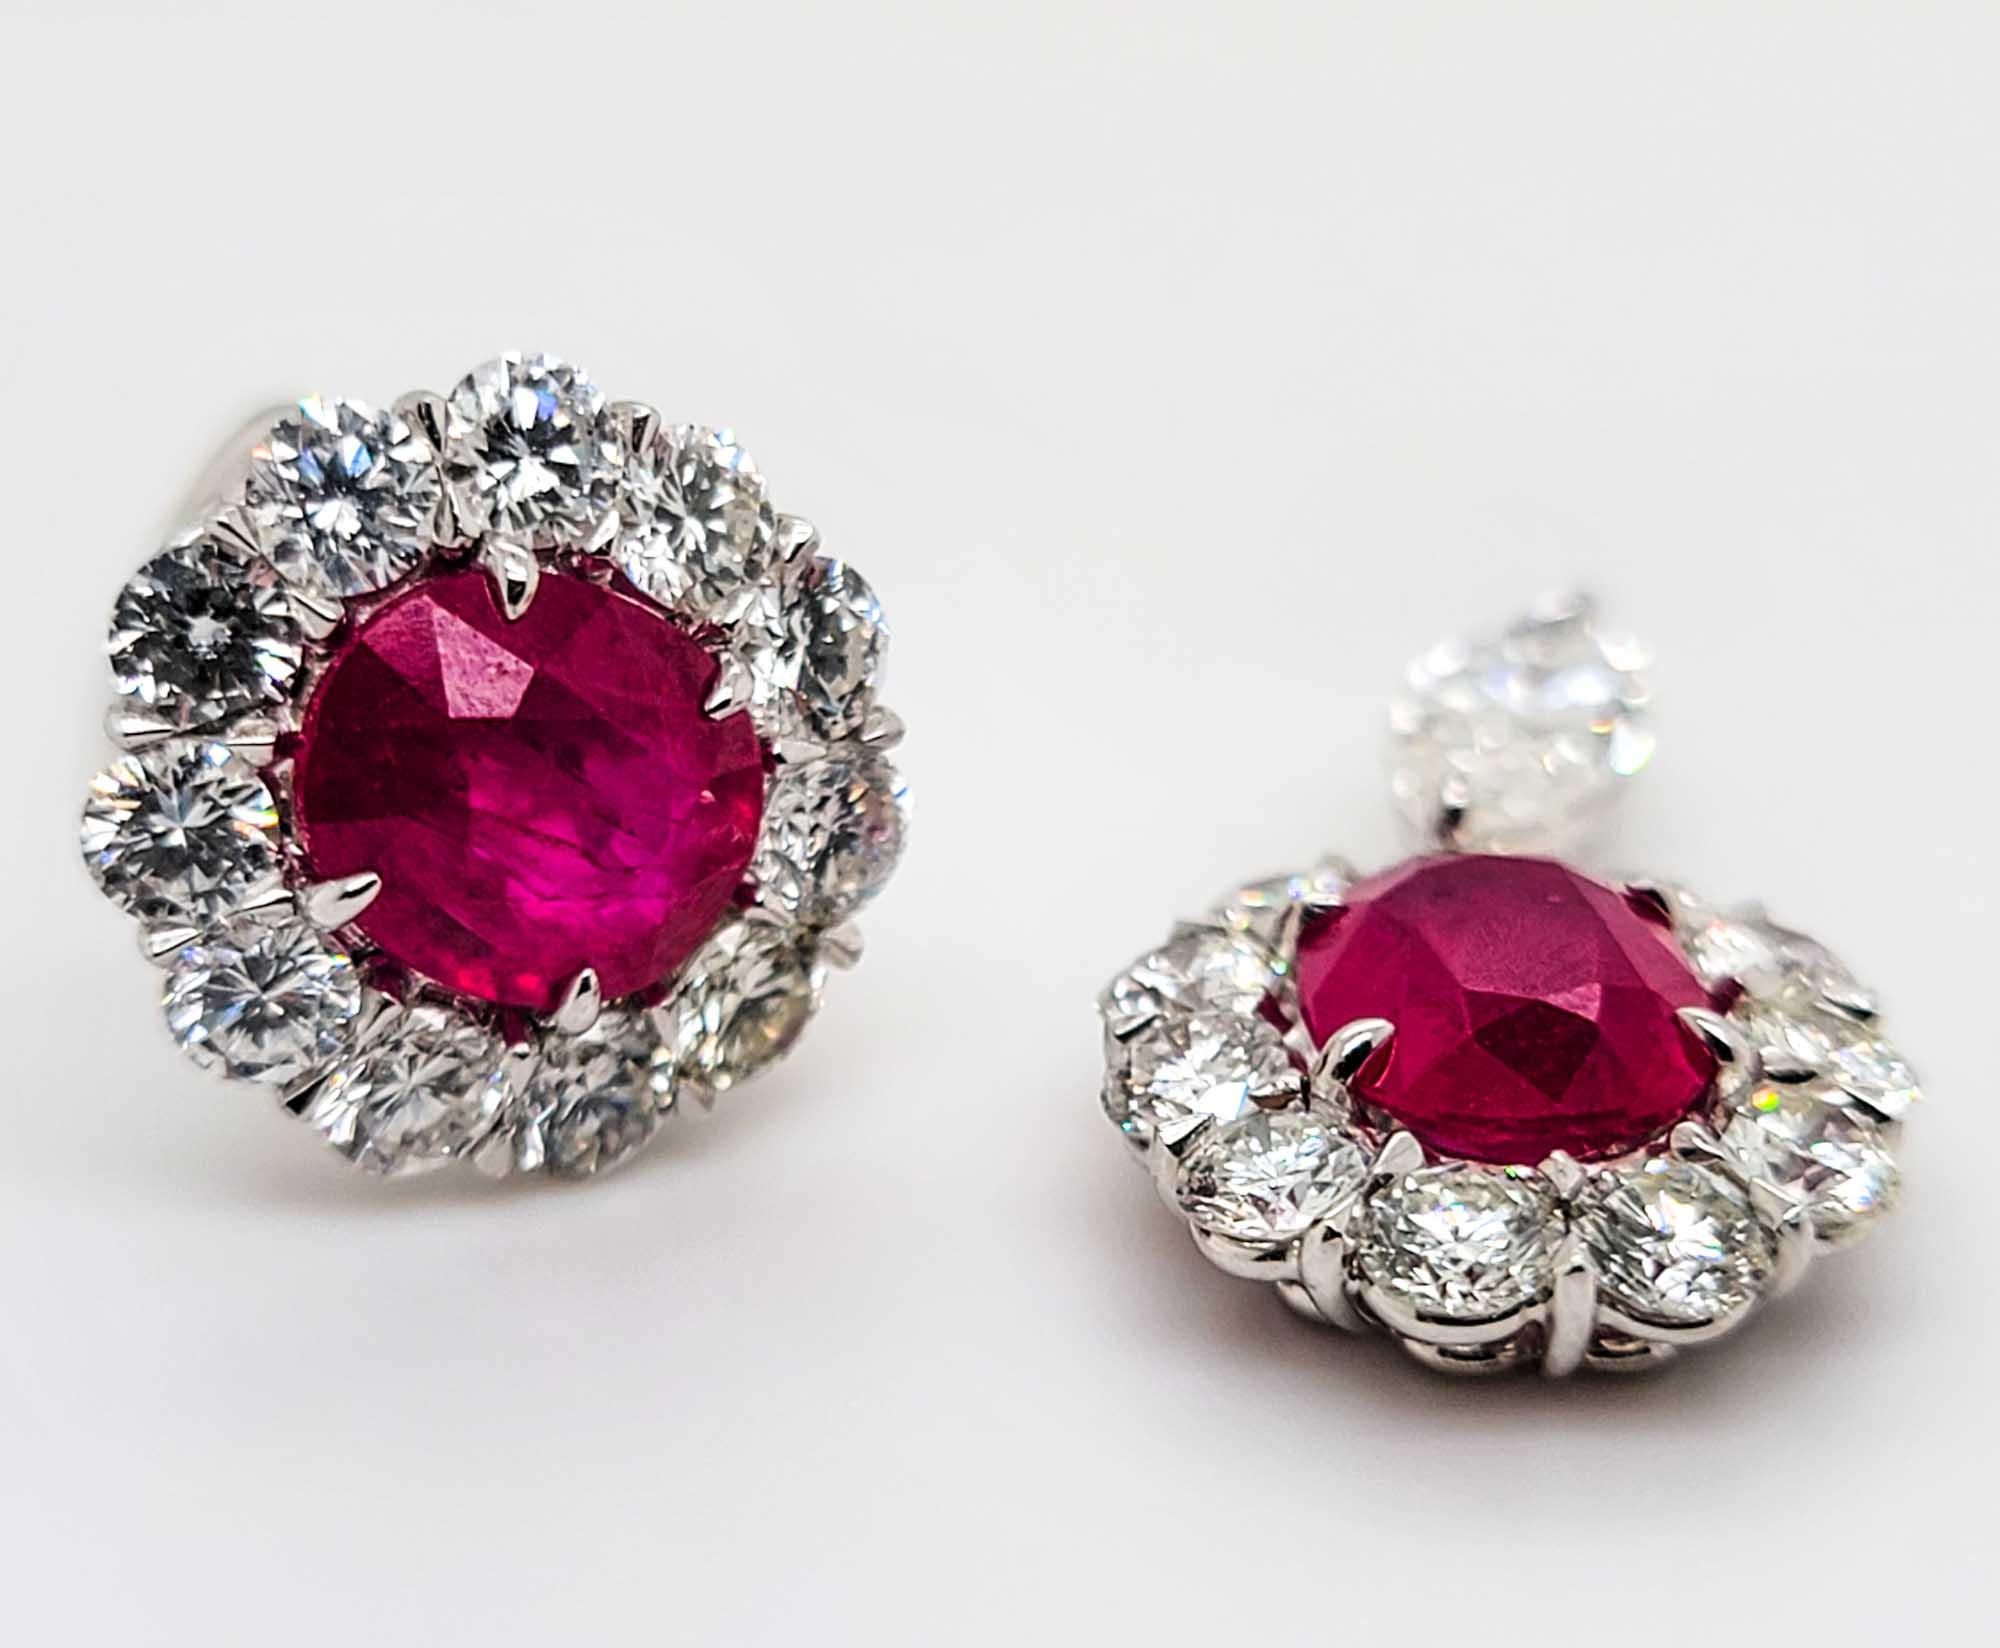 Beautifully designed platinum earrings by Sophia D that features round rubies with total weight of 8.77 carats and together with marquise diamonds in between and surrounding round diamonds with total weight 6.79 carats detachable earrings.

Sophia D